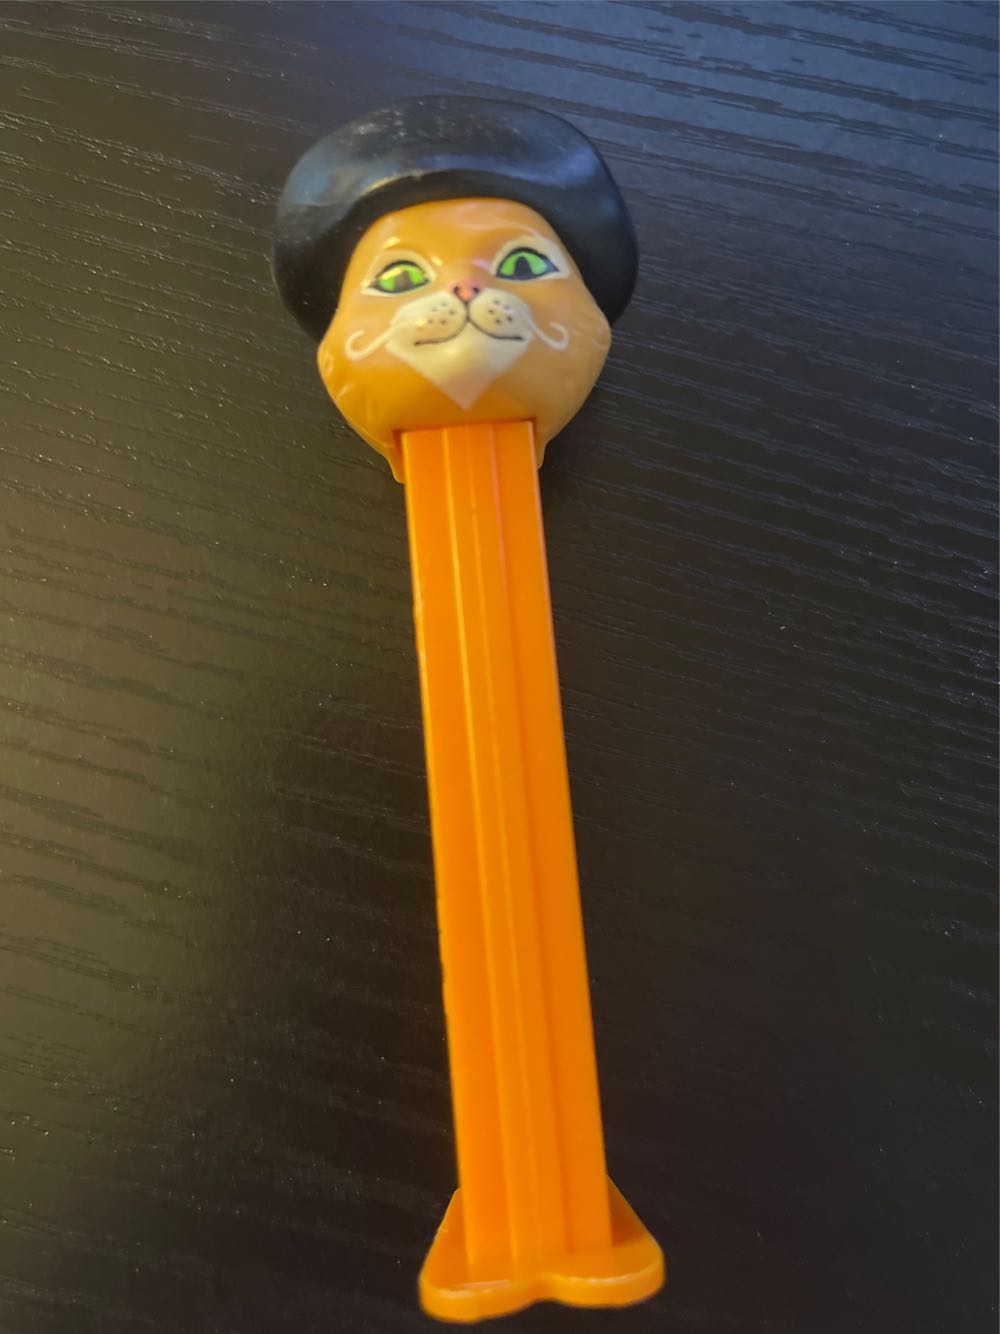 Puss In Boots - Shrek pez collectible - Main Image 2